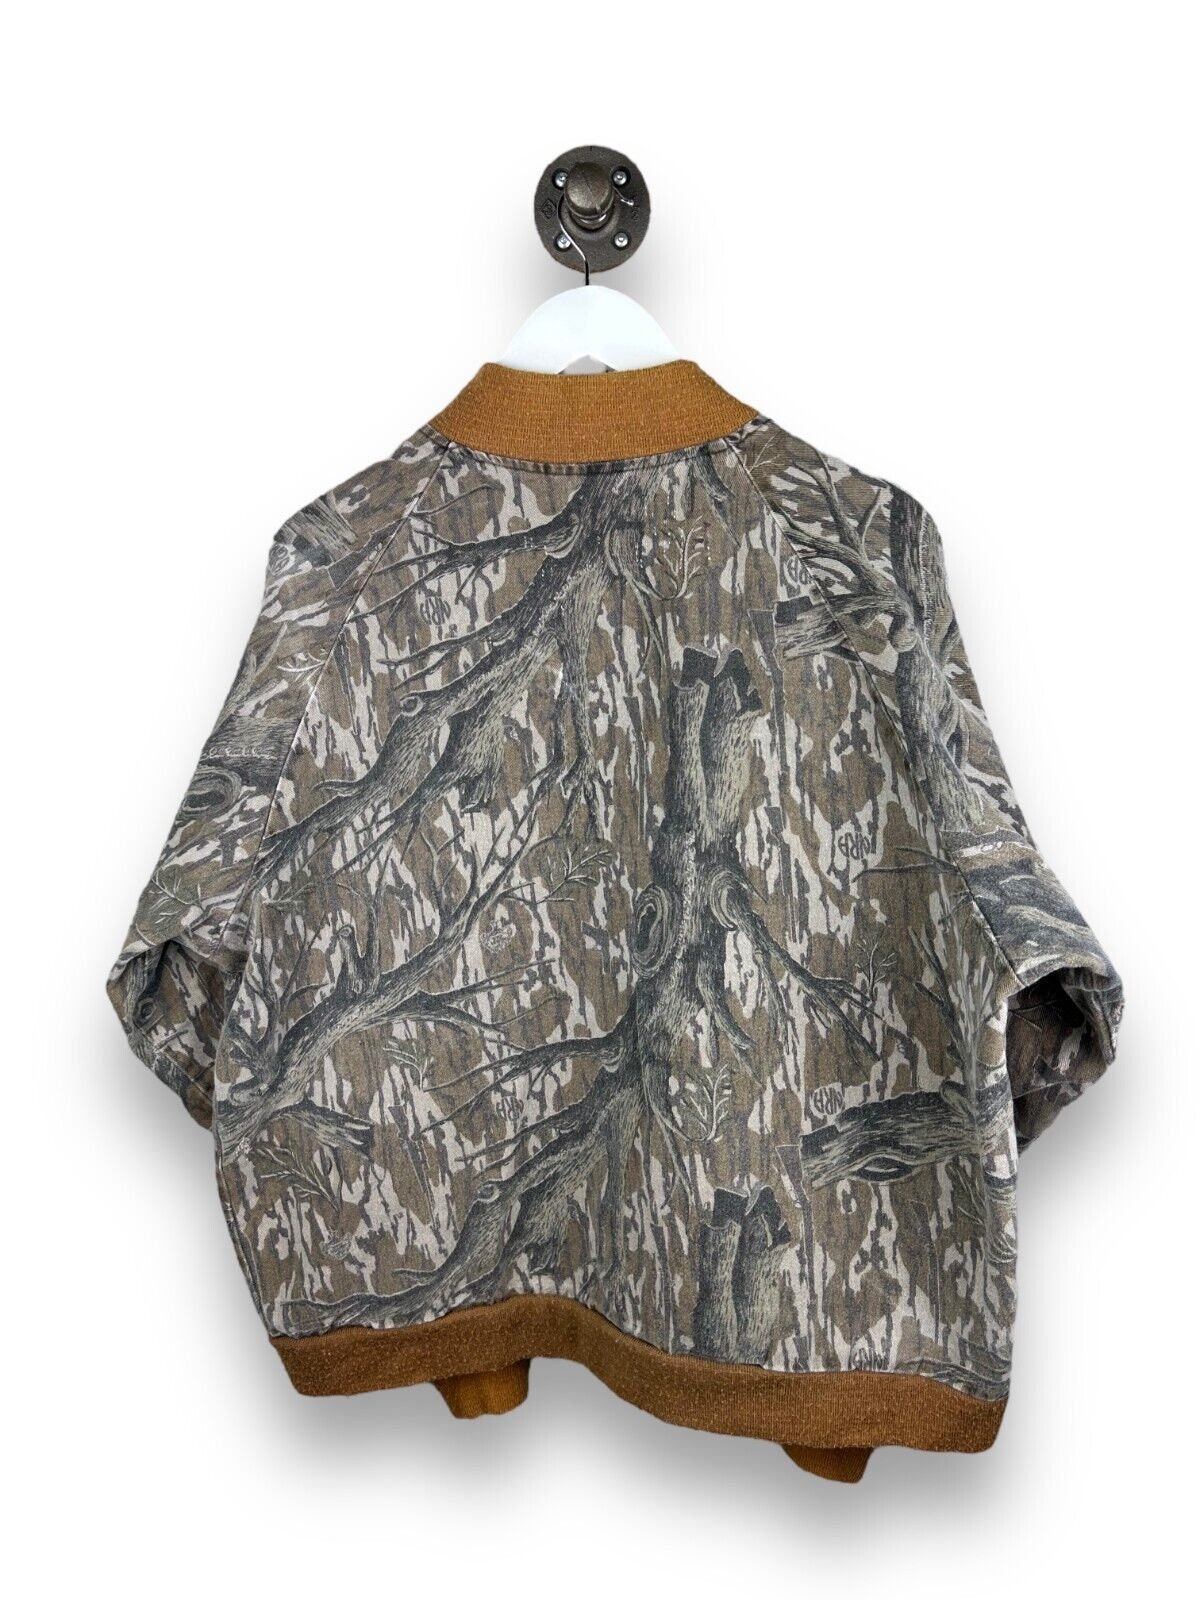 Vintage 80's/90's Real Tree Camo Lightweight Jacket by 10x